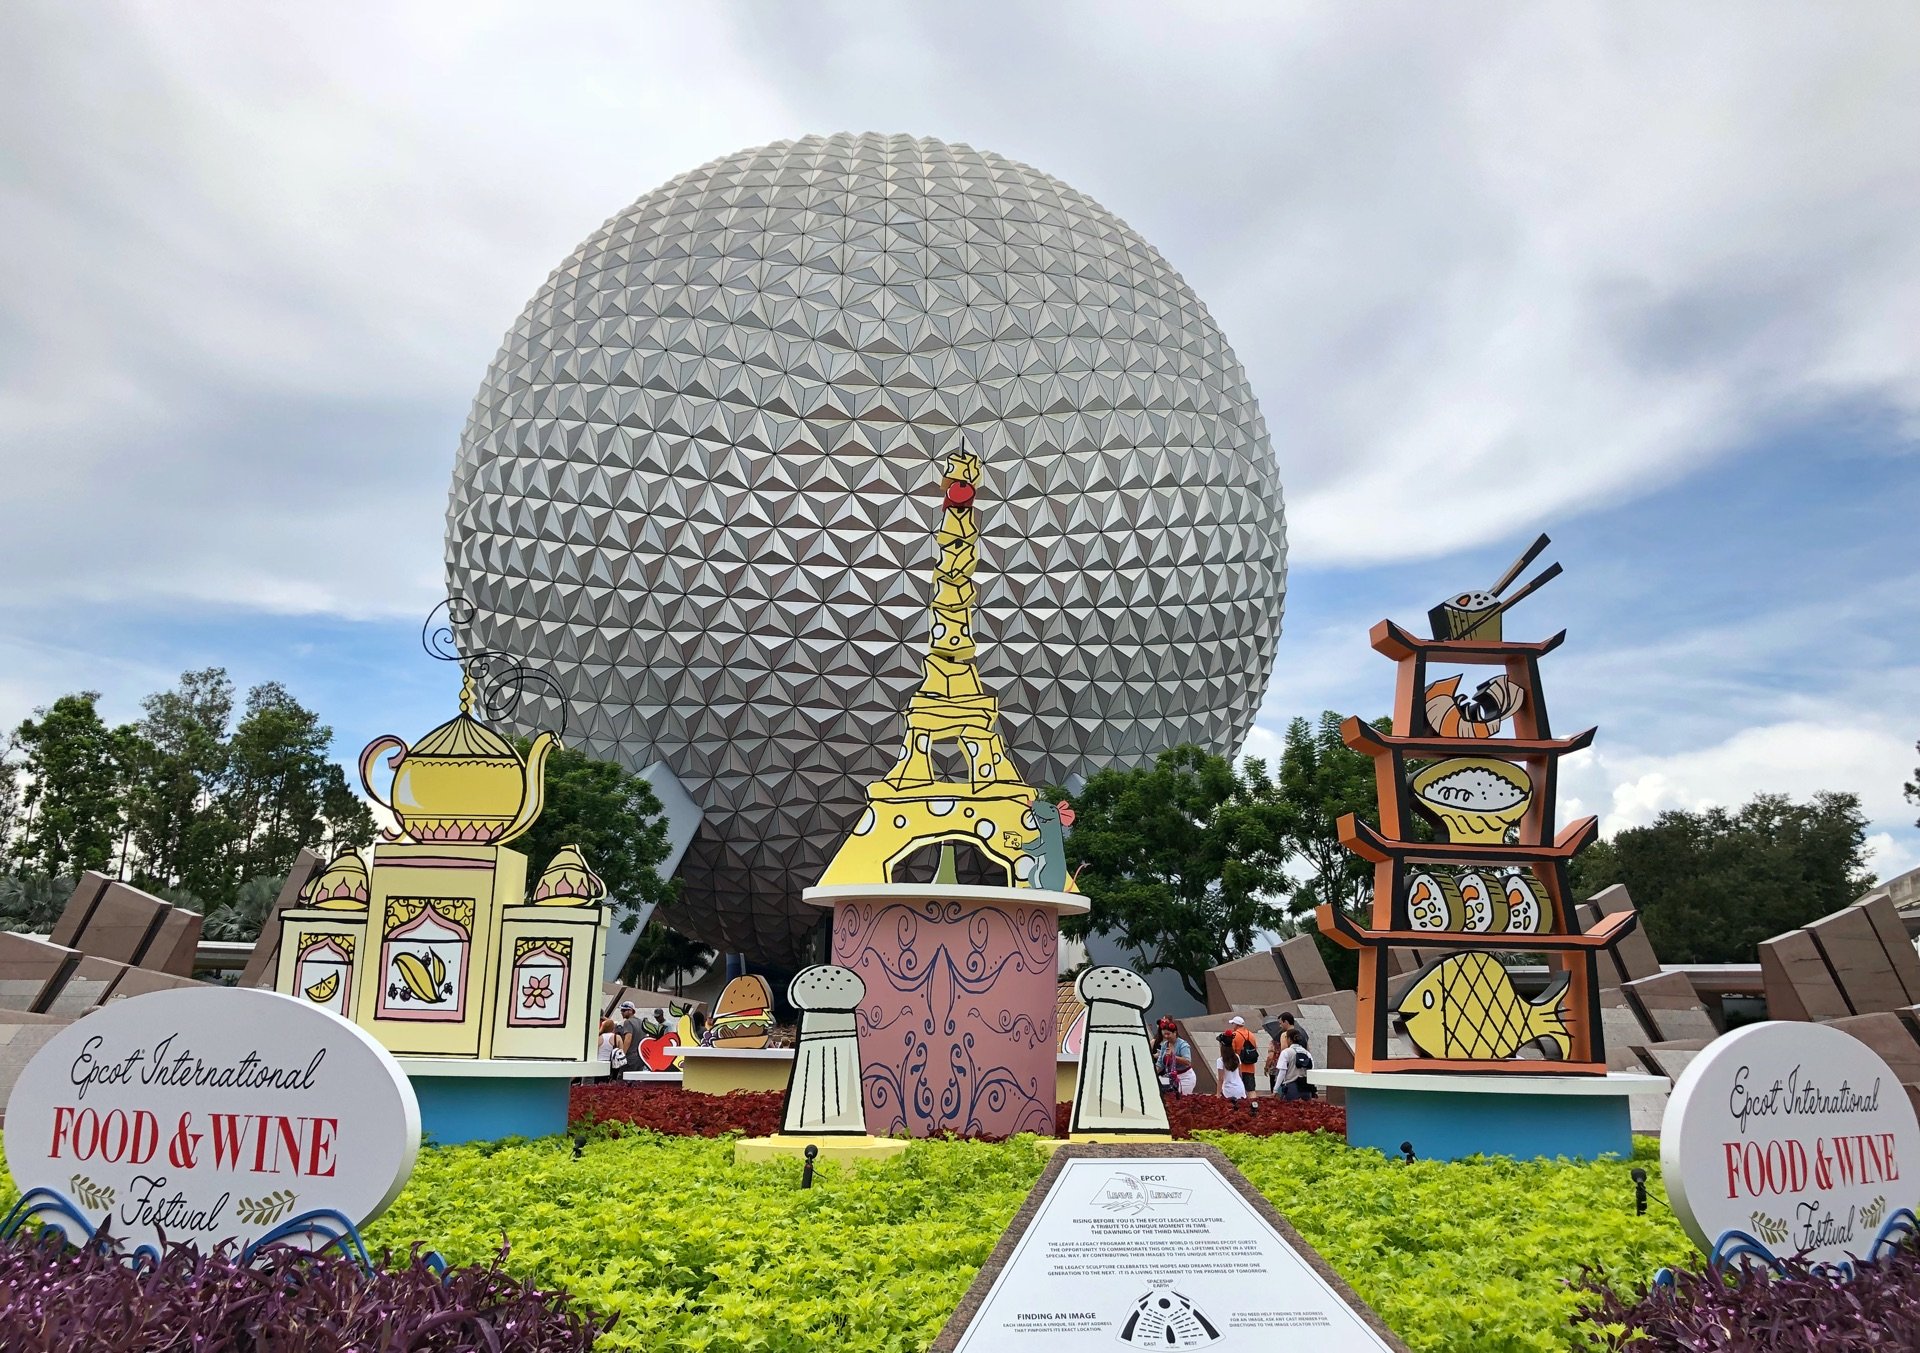 Every New Item at the 2018 Epcot Food and Wine Festival ...